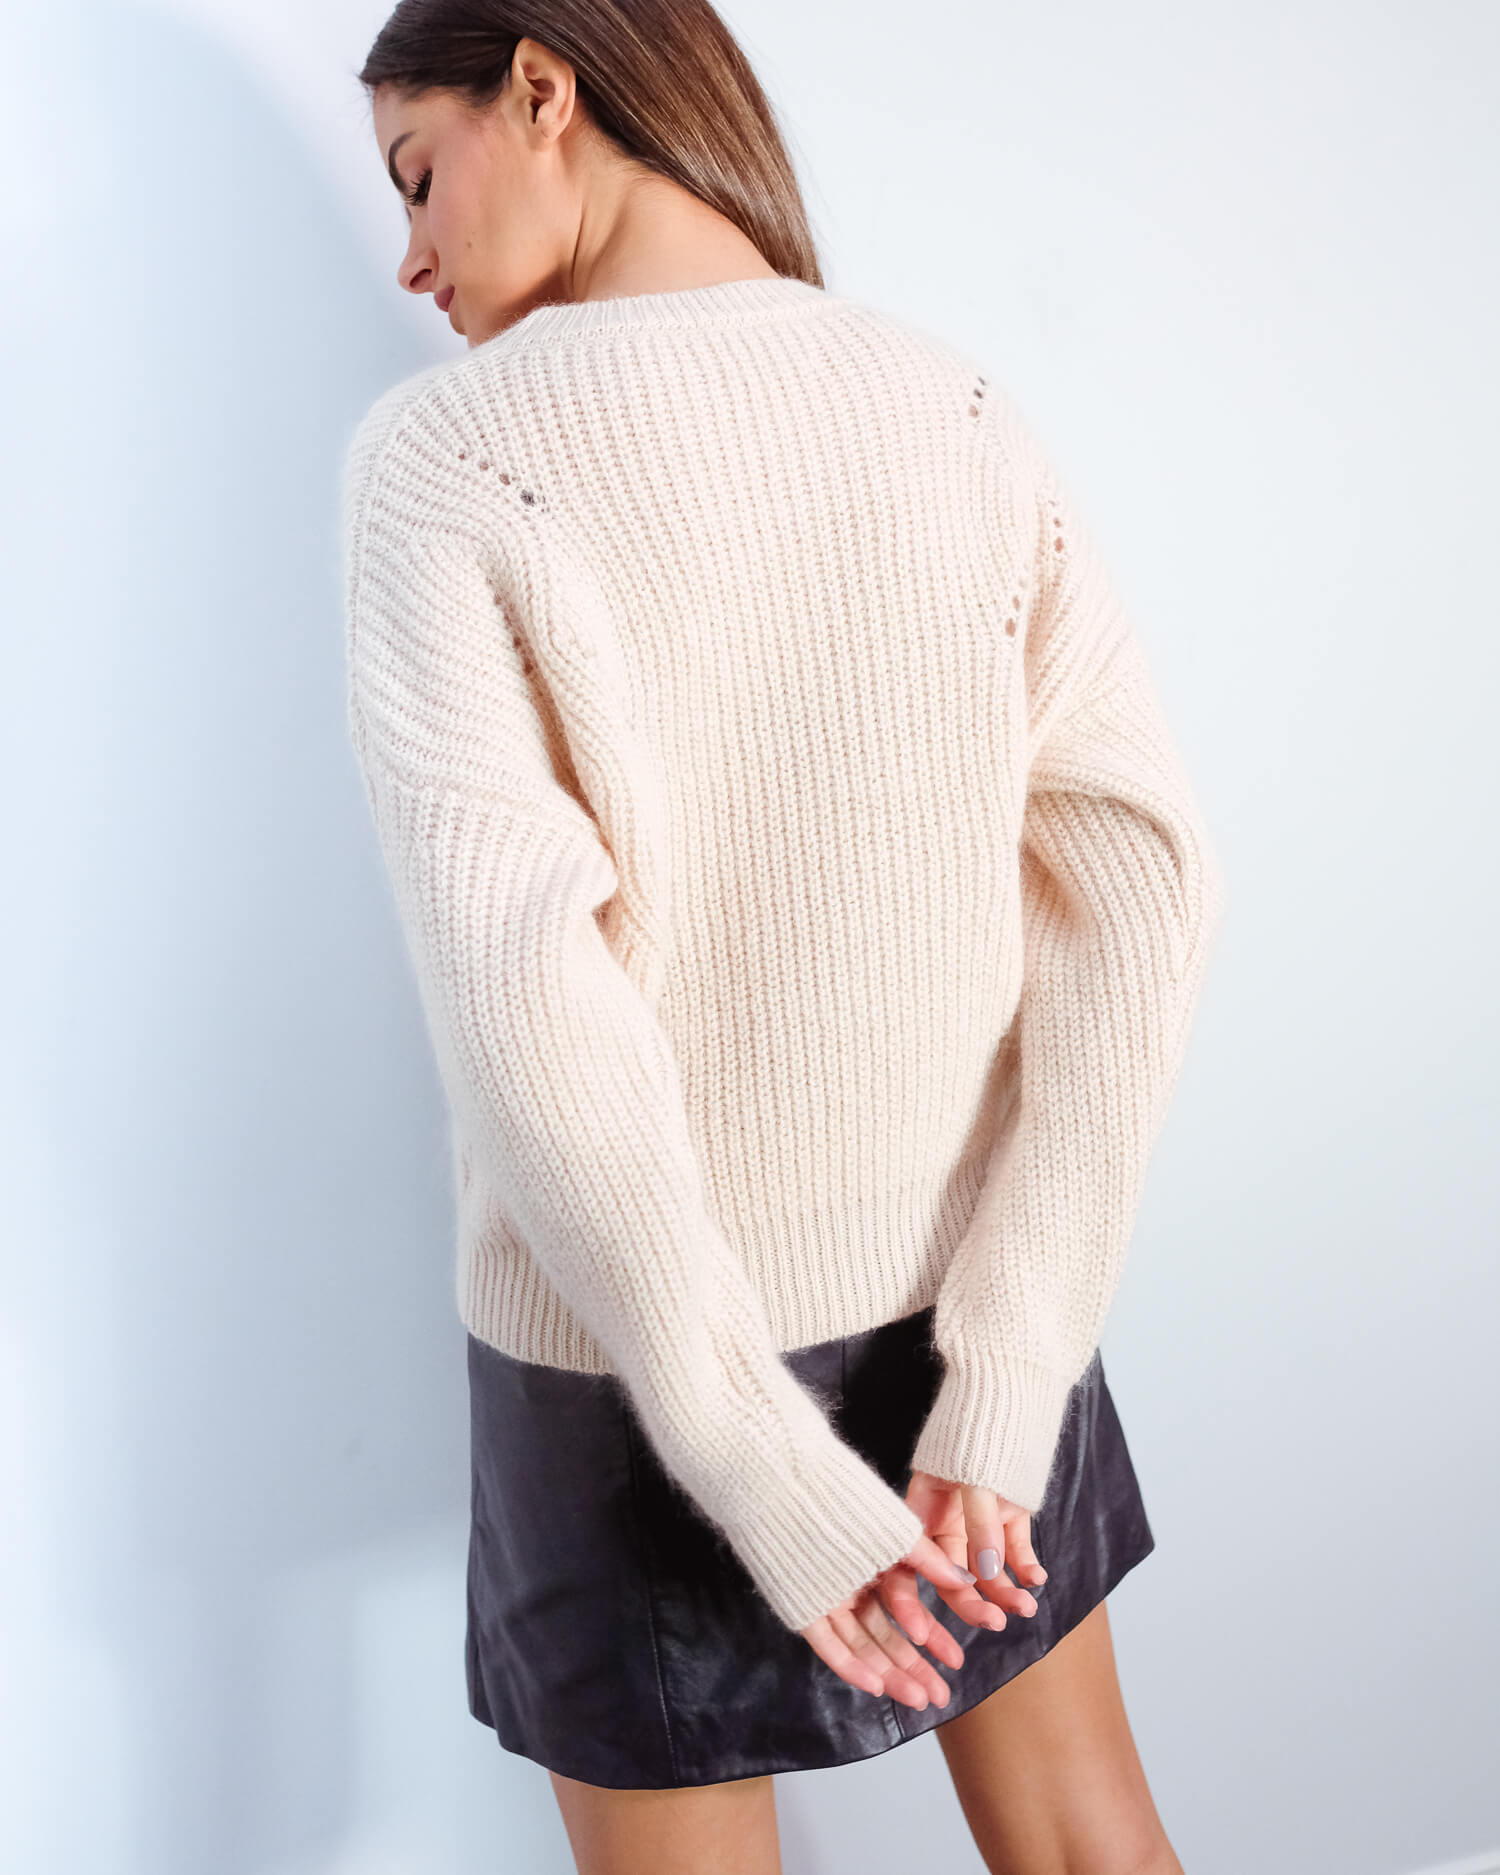 EA Vally knit in white